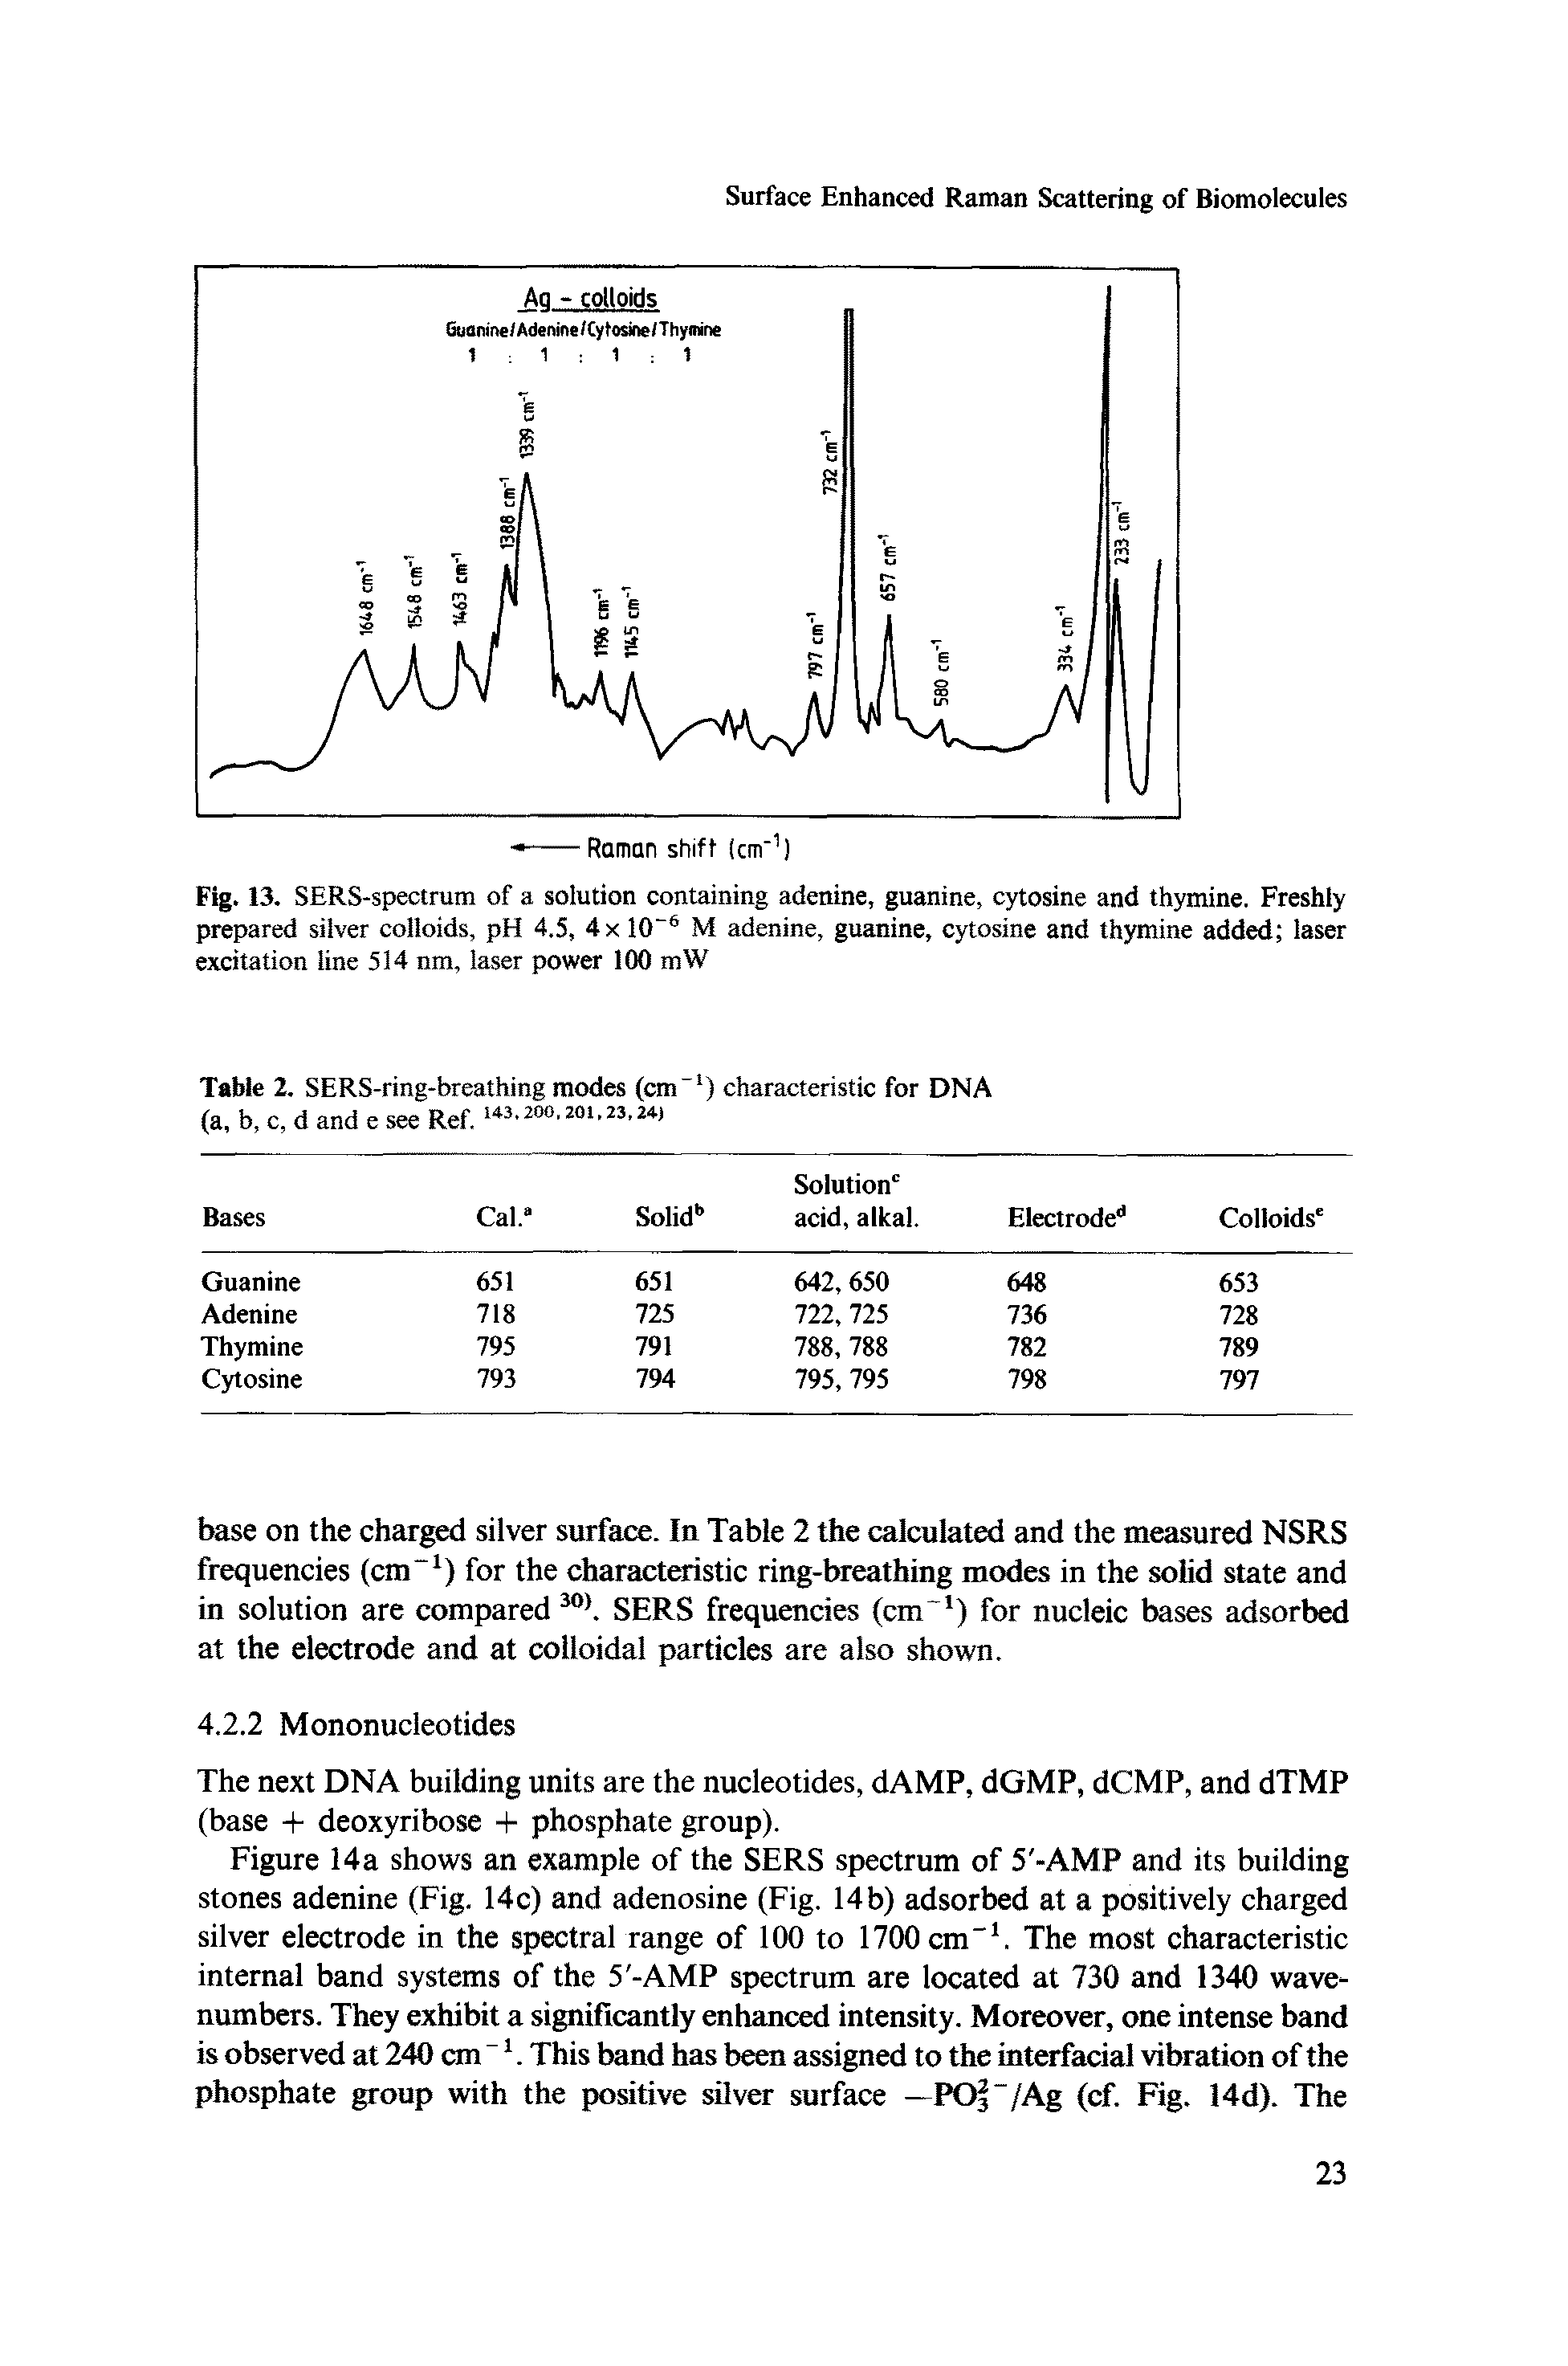 Figure 14a shows an example of the SERS spectrum of 5 -AMP and its building stones adenine (Fig. 14c) and adenosine (Fig. 14b) adsorbed at a positively charged silver electrode in the spectral range of 100 to 1700 cm". The most characteristic internal band systems of the 5 -AMP spectrum are located at 730 and 1340 wave-numbers. They exhibit a significantly enhanced intensity. Moreover, one intense band is observed at 240 cm " This band has been assigned to the interfacial vibration of the phosphate group with the positive silver surface —POf /Ag (cf. Fig. 14d). The...